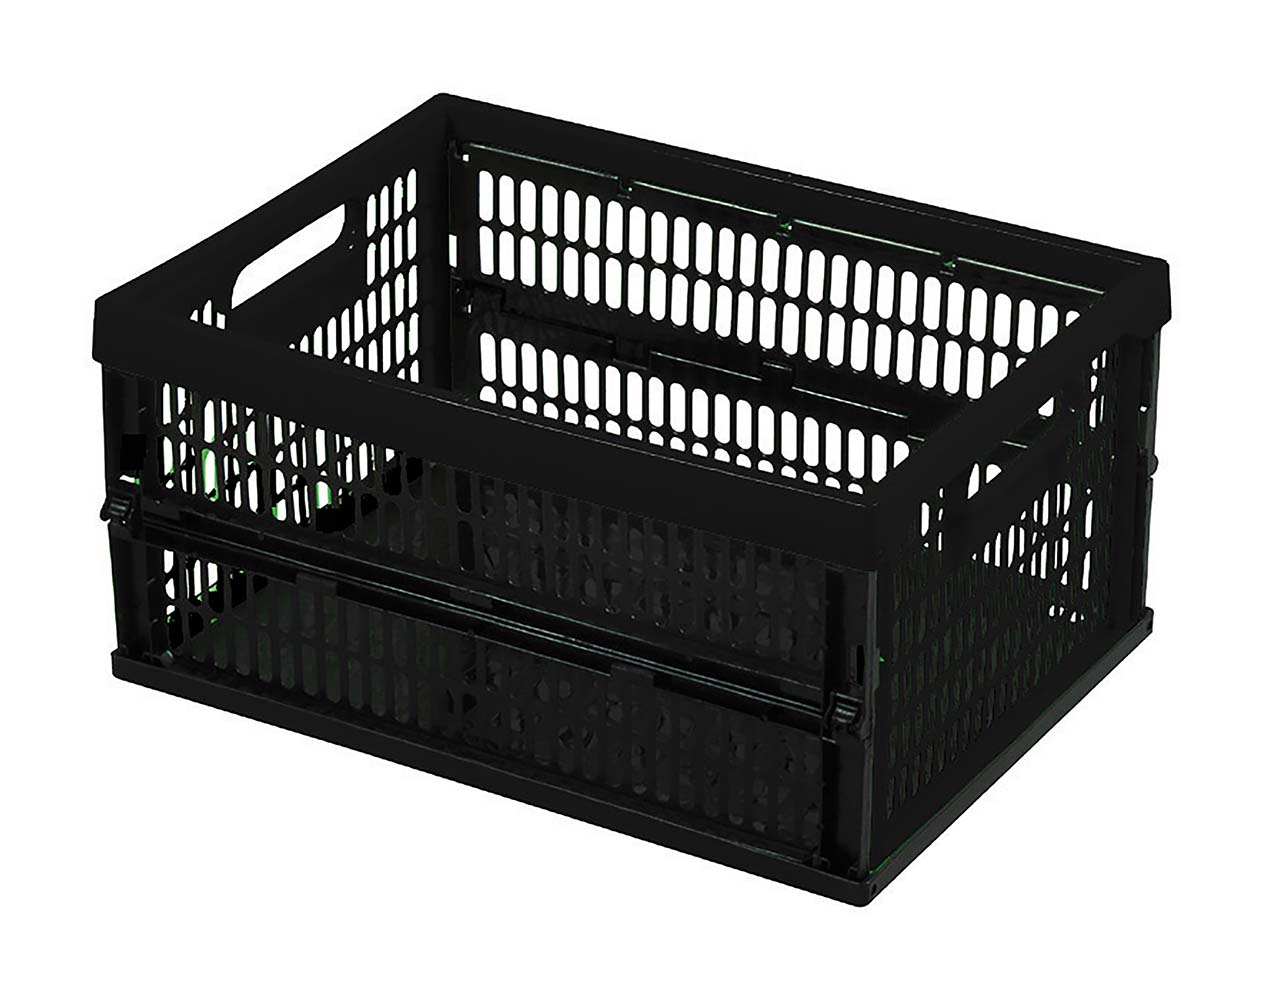 6302024 Very sturdy folding crate. Handy for storing and/or transporting belongings. The bed is easy to fold and unfold.